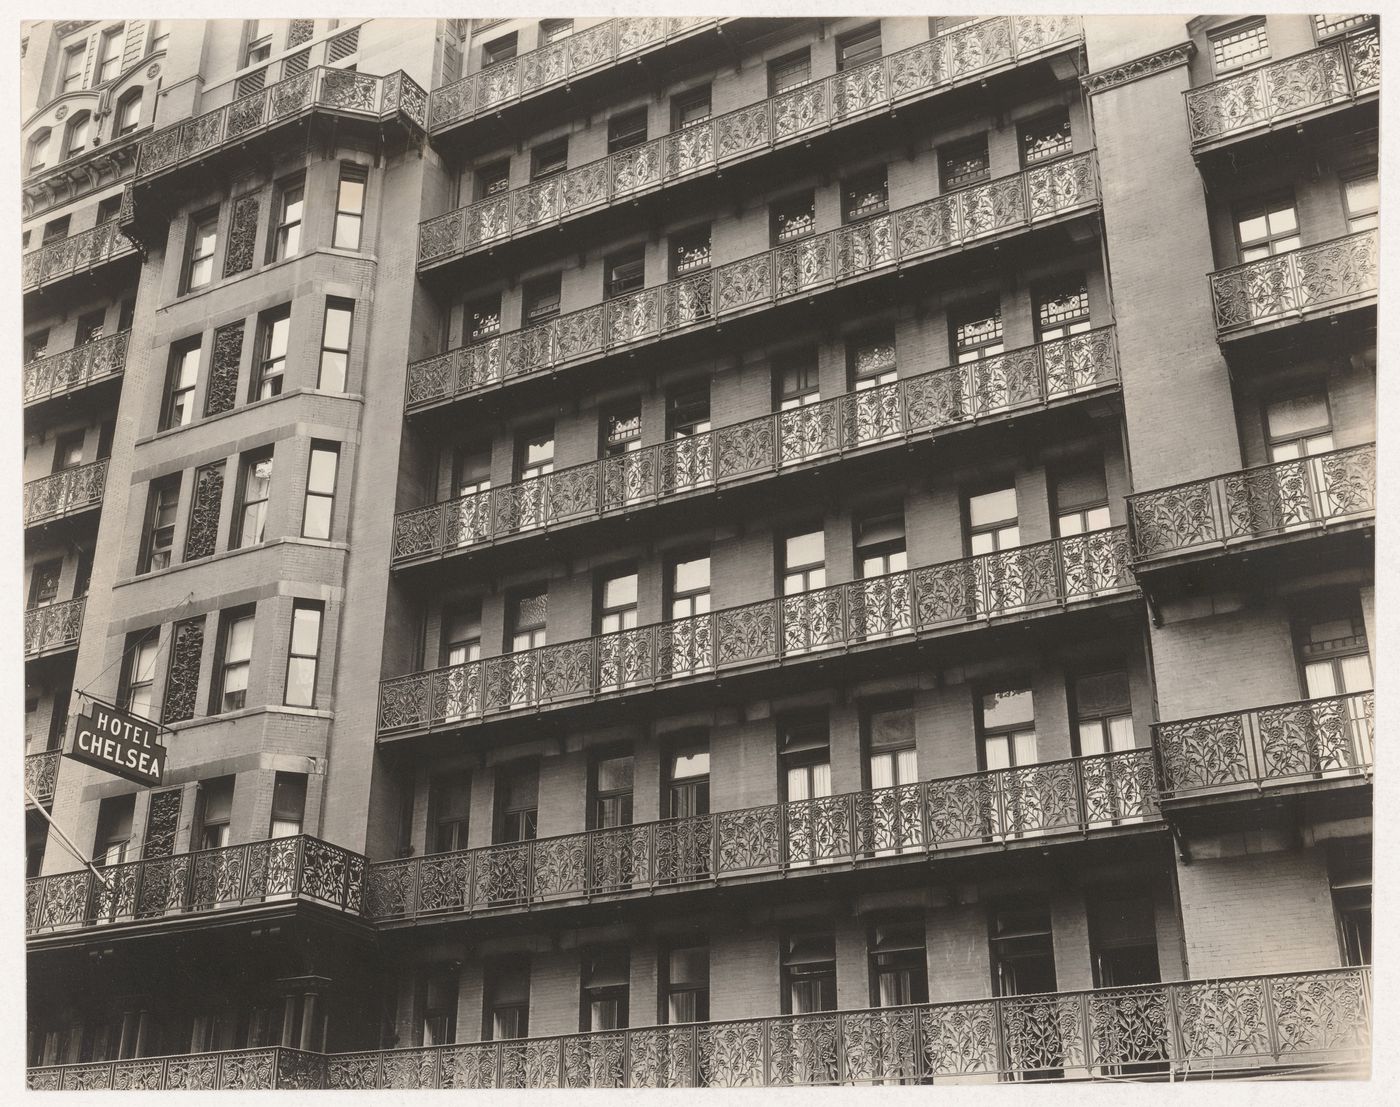 Chelsea Hotel, 23rd Street between 7th and 8th Avenue